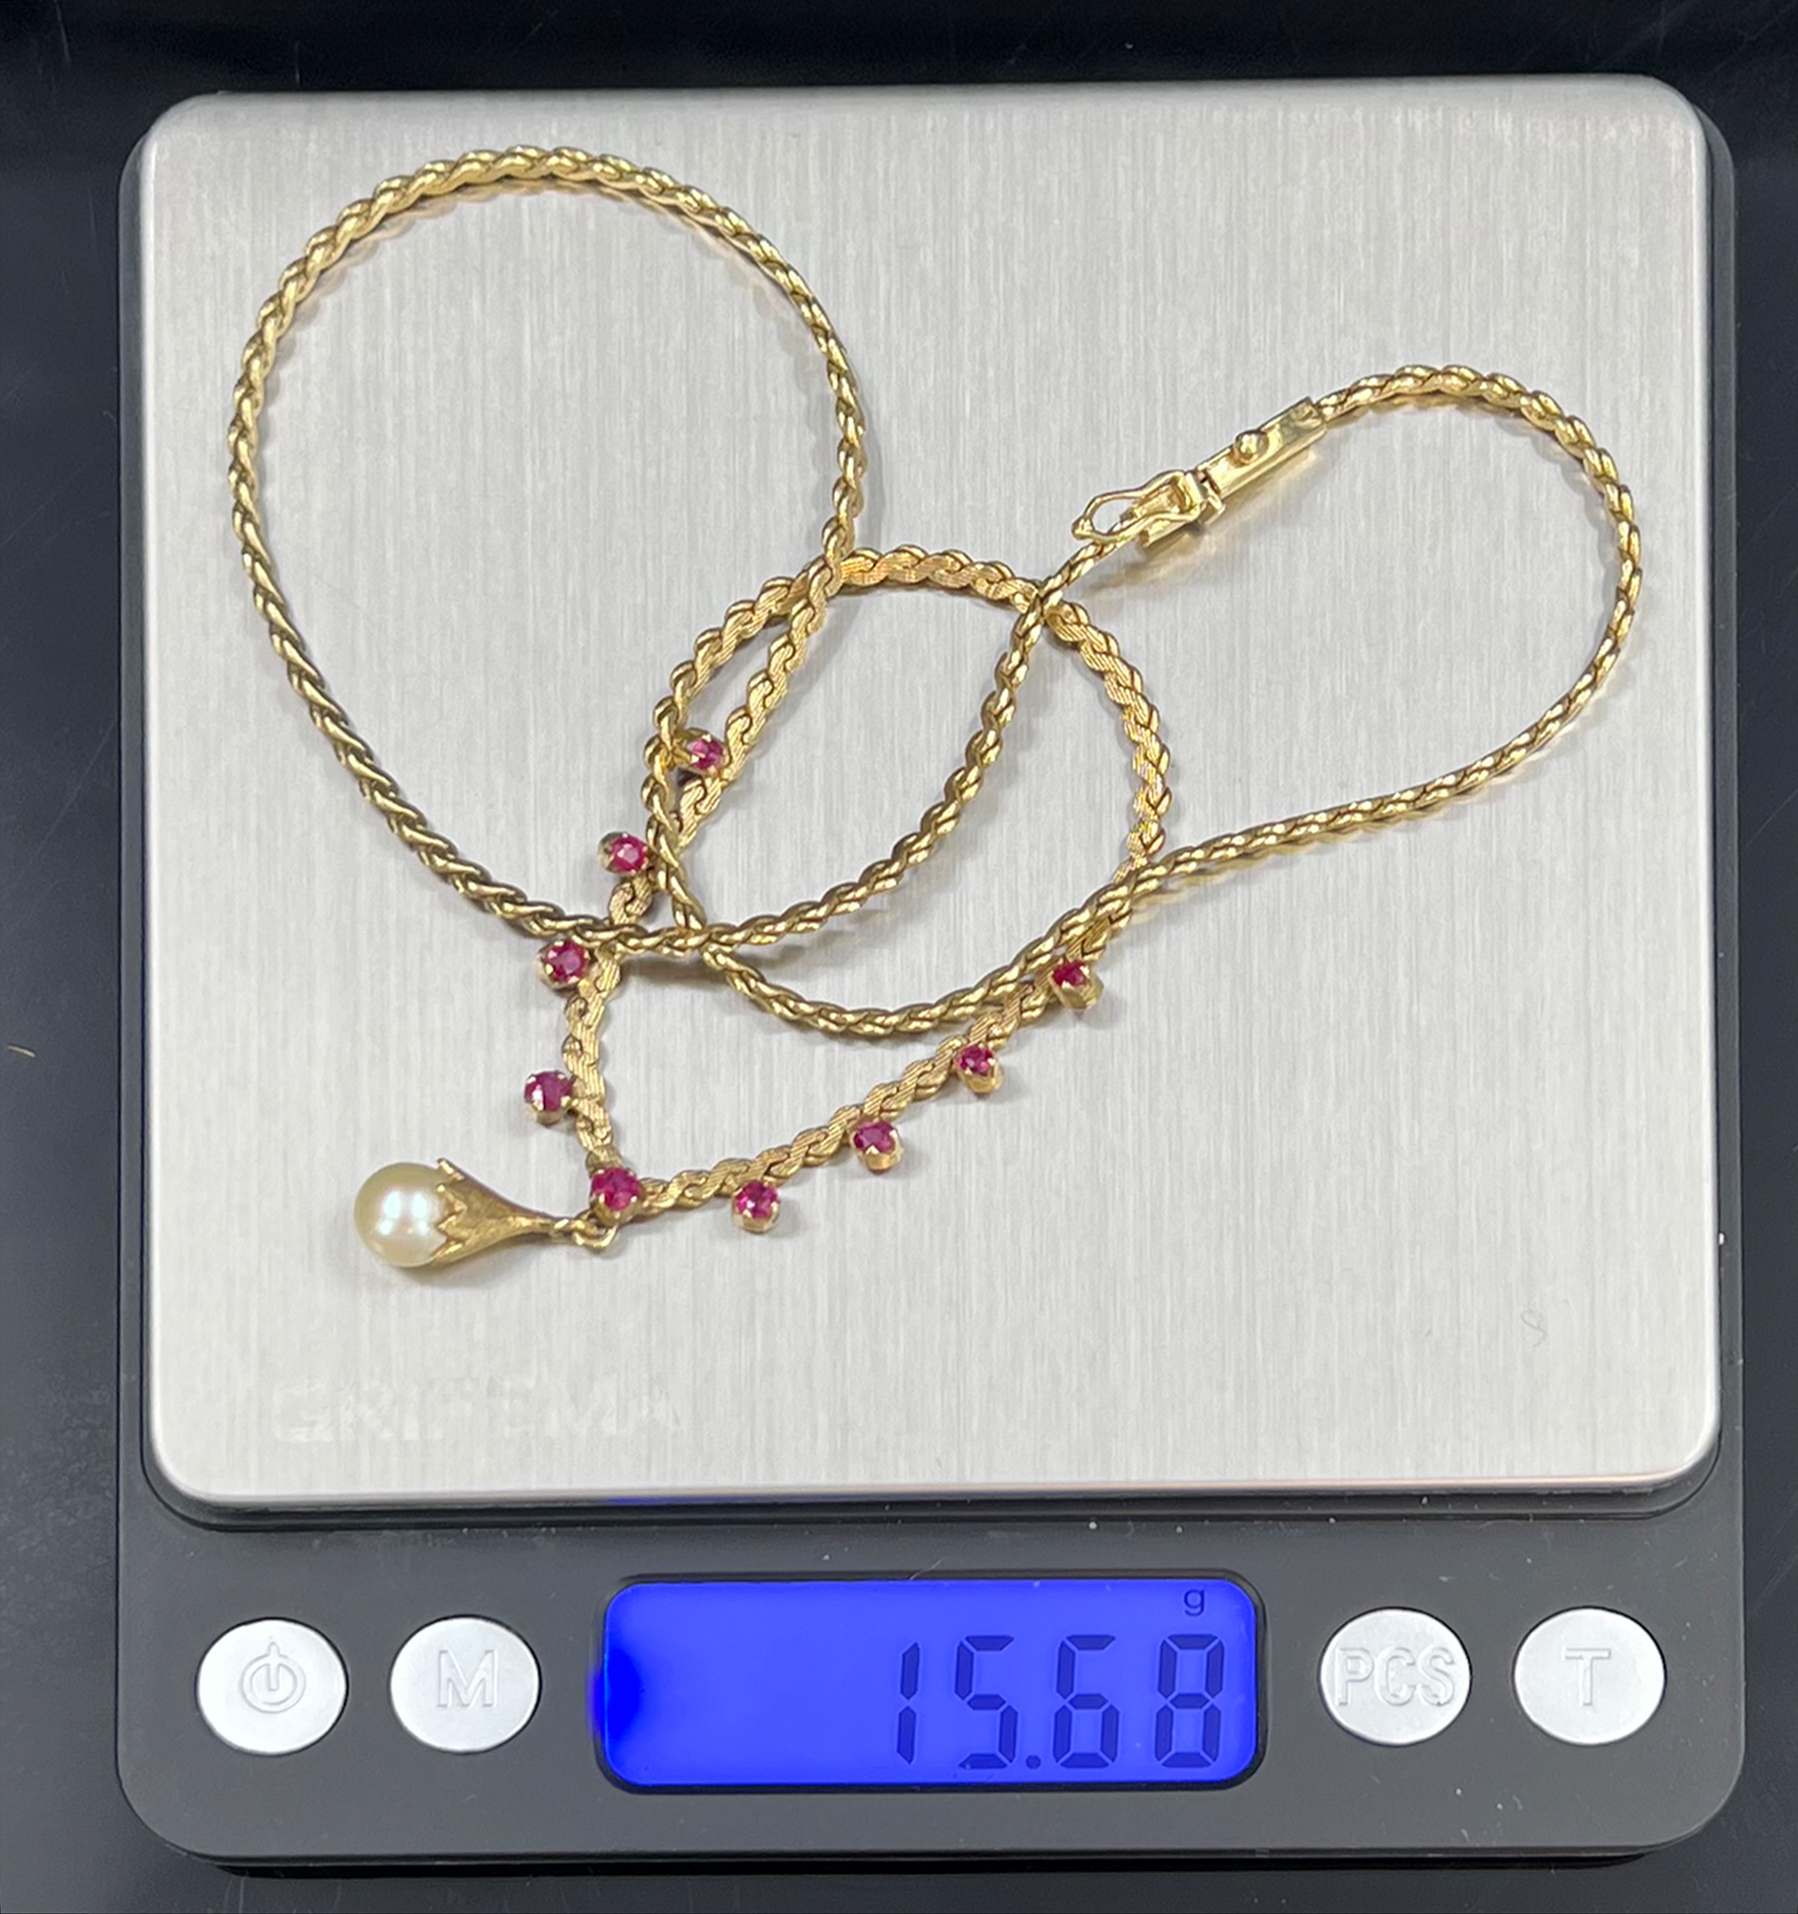 Necklace. 585 yellow gold with 9 small rubies and a pearl. - Image 5 of 5